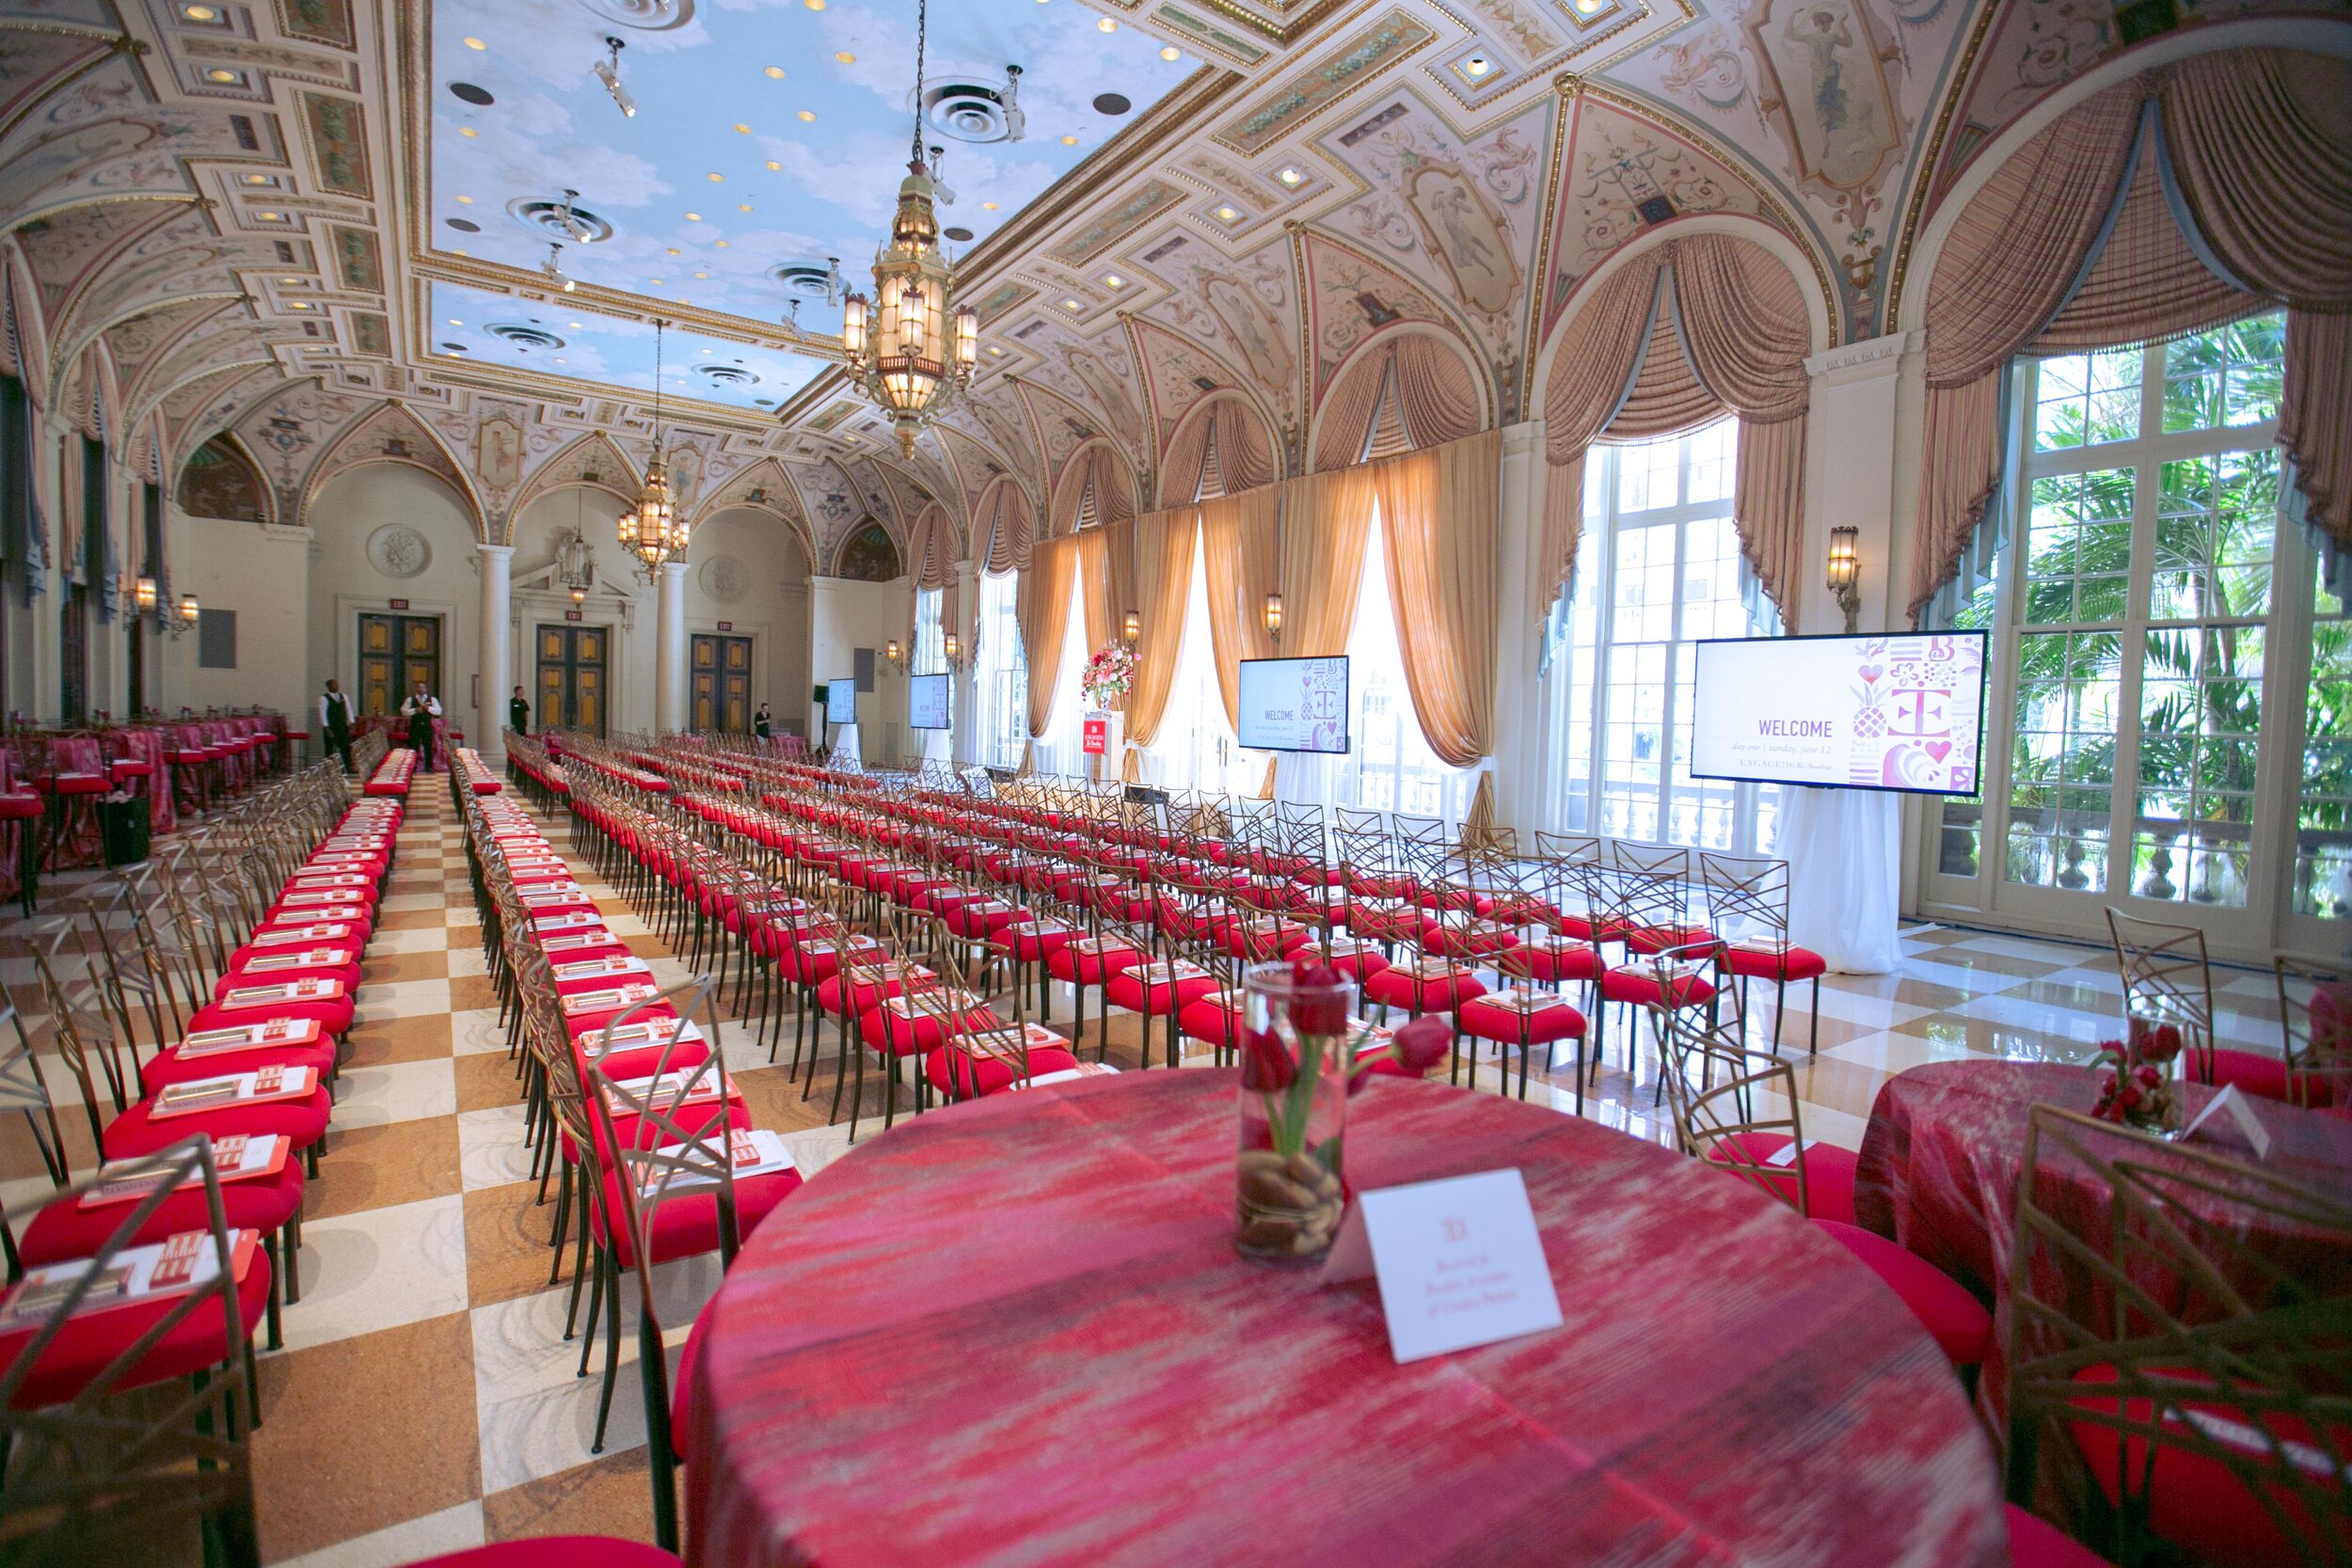 THE BREAKERS BALLROOM READY FOR A CORPORATE CONFERENCE